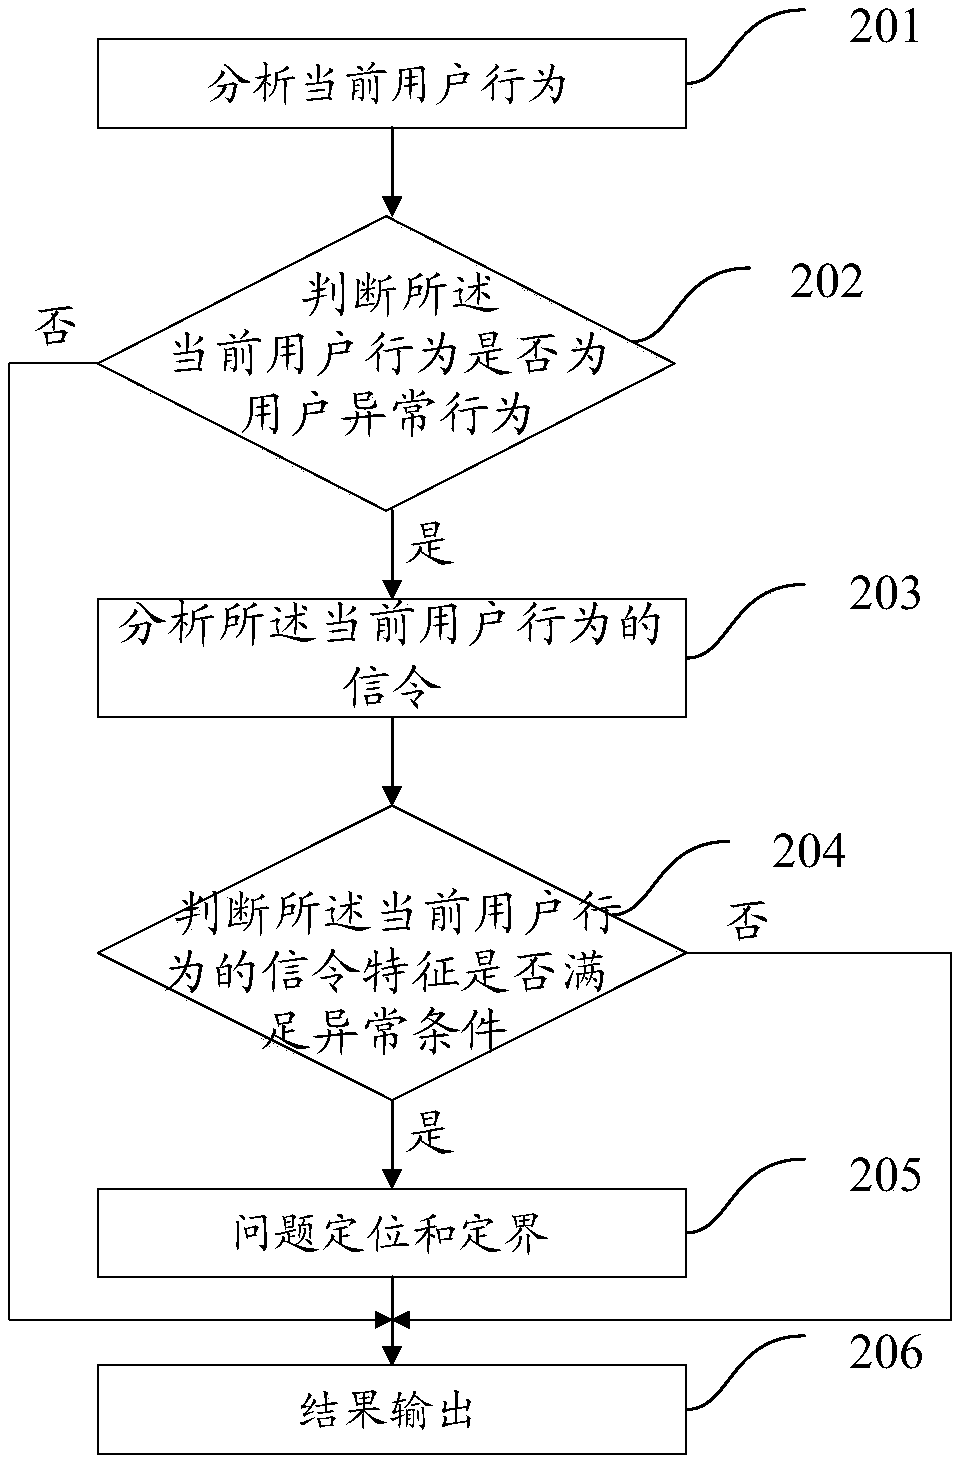 Method and apparatus for monitoring quality of service